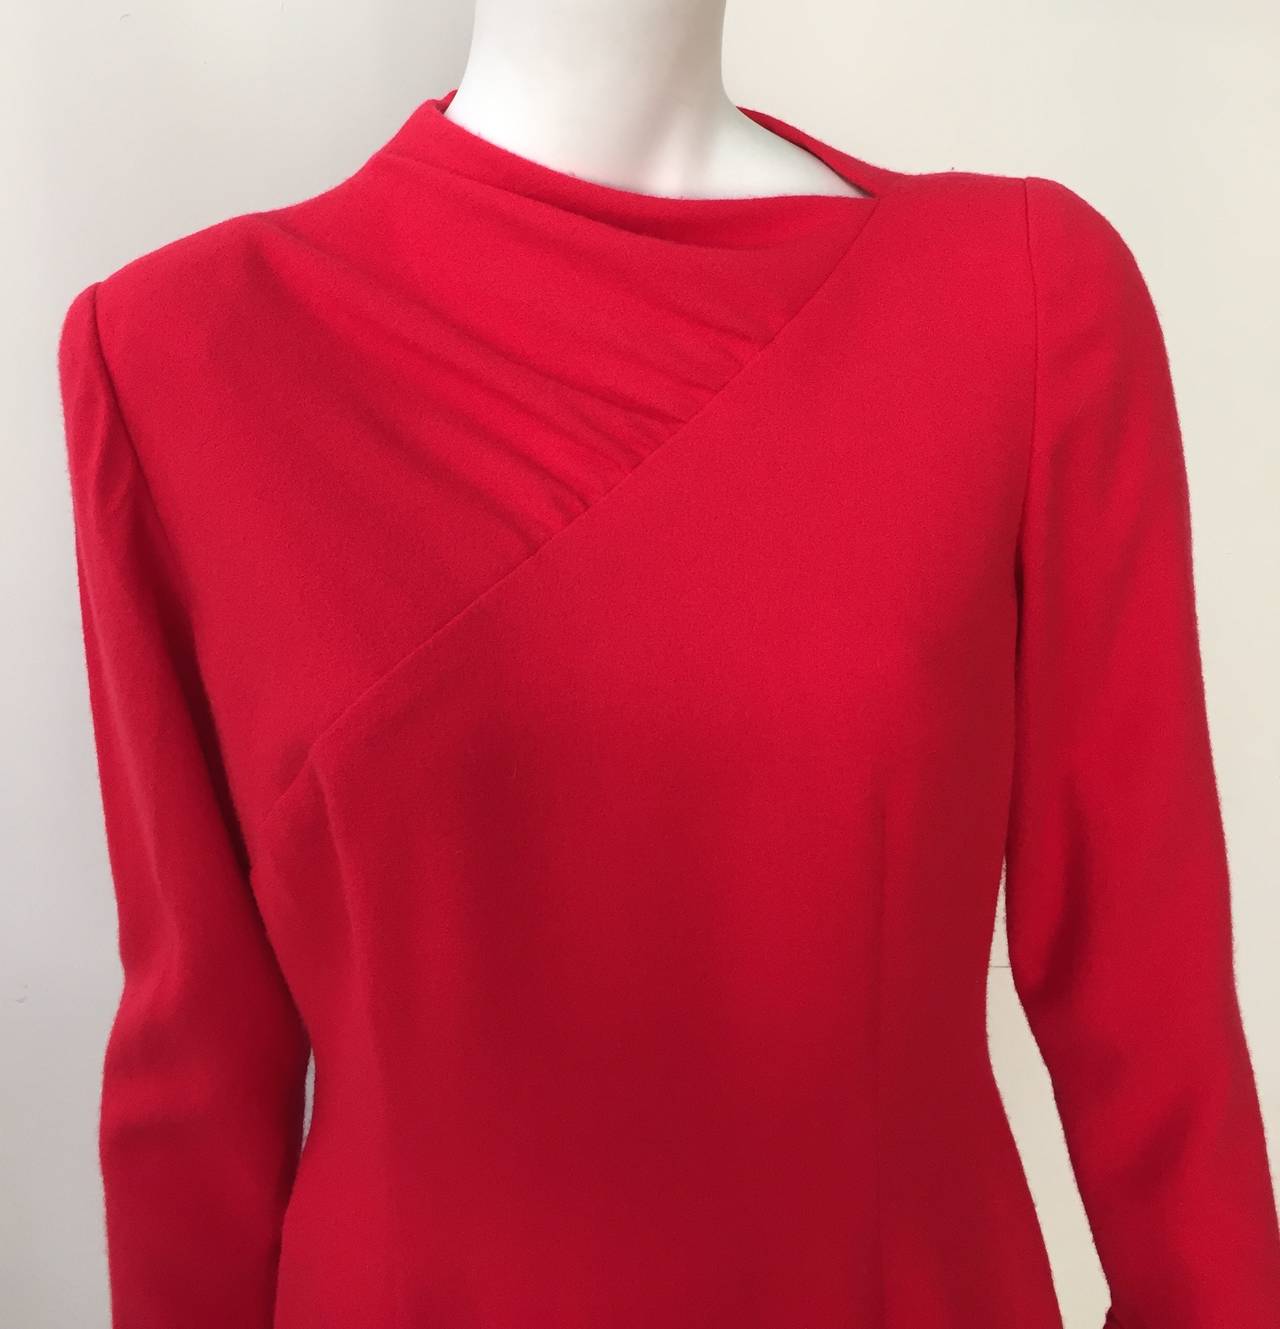 Bill Blass 1970s Red Wool Dress Size 10 / 12. In Good Condition For Sale In Atlanta, GA